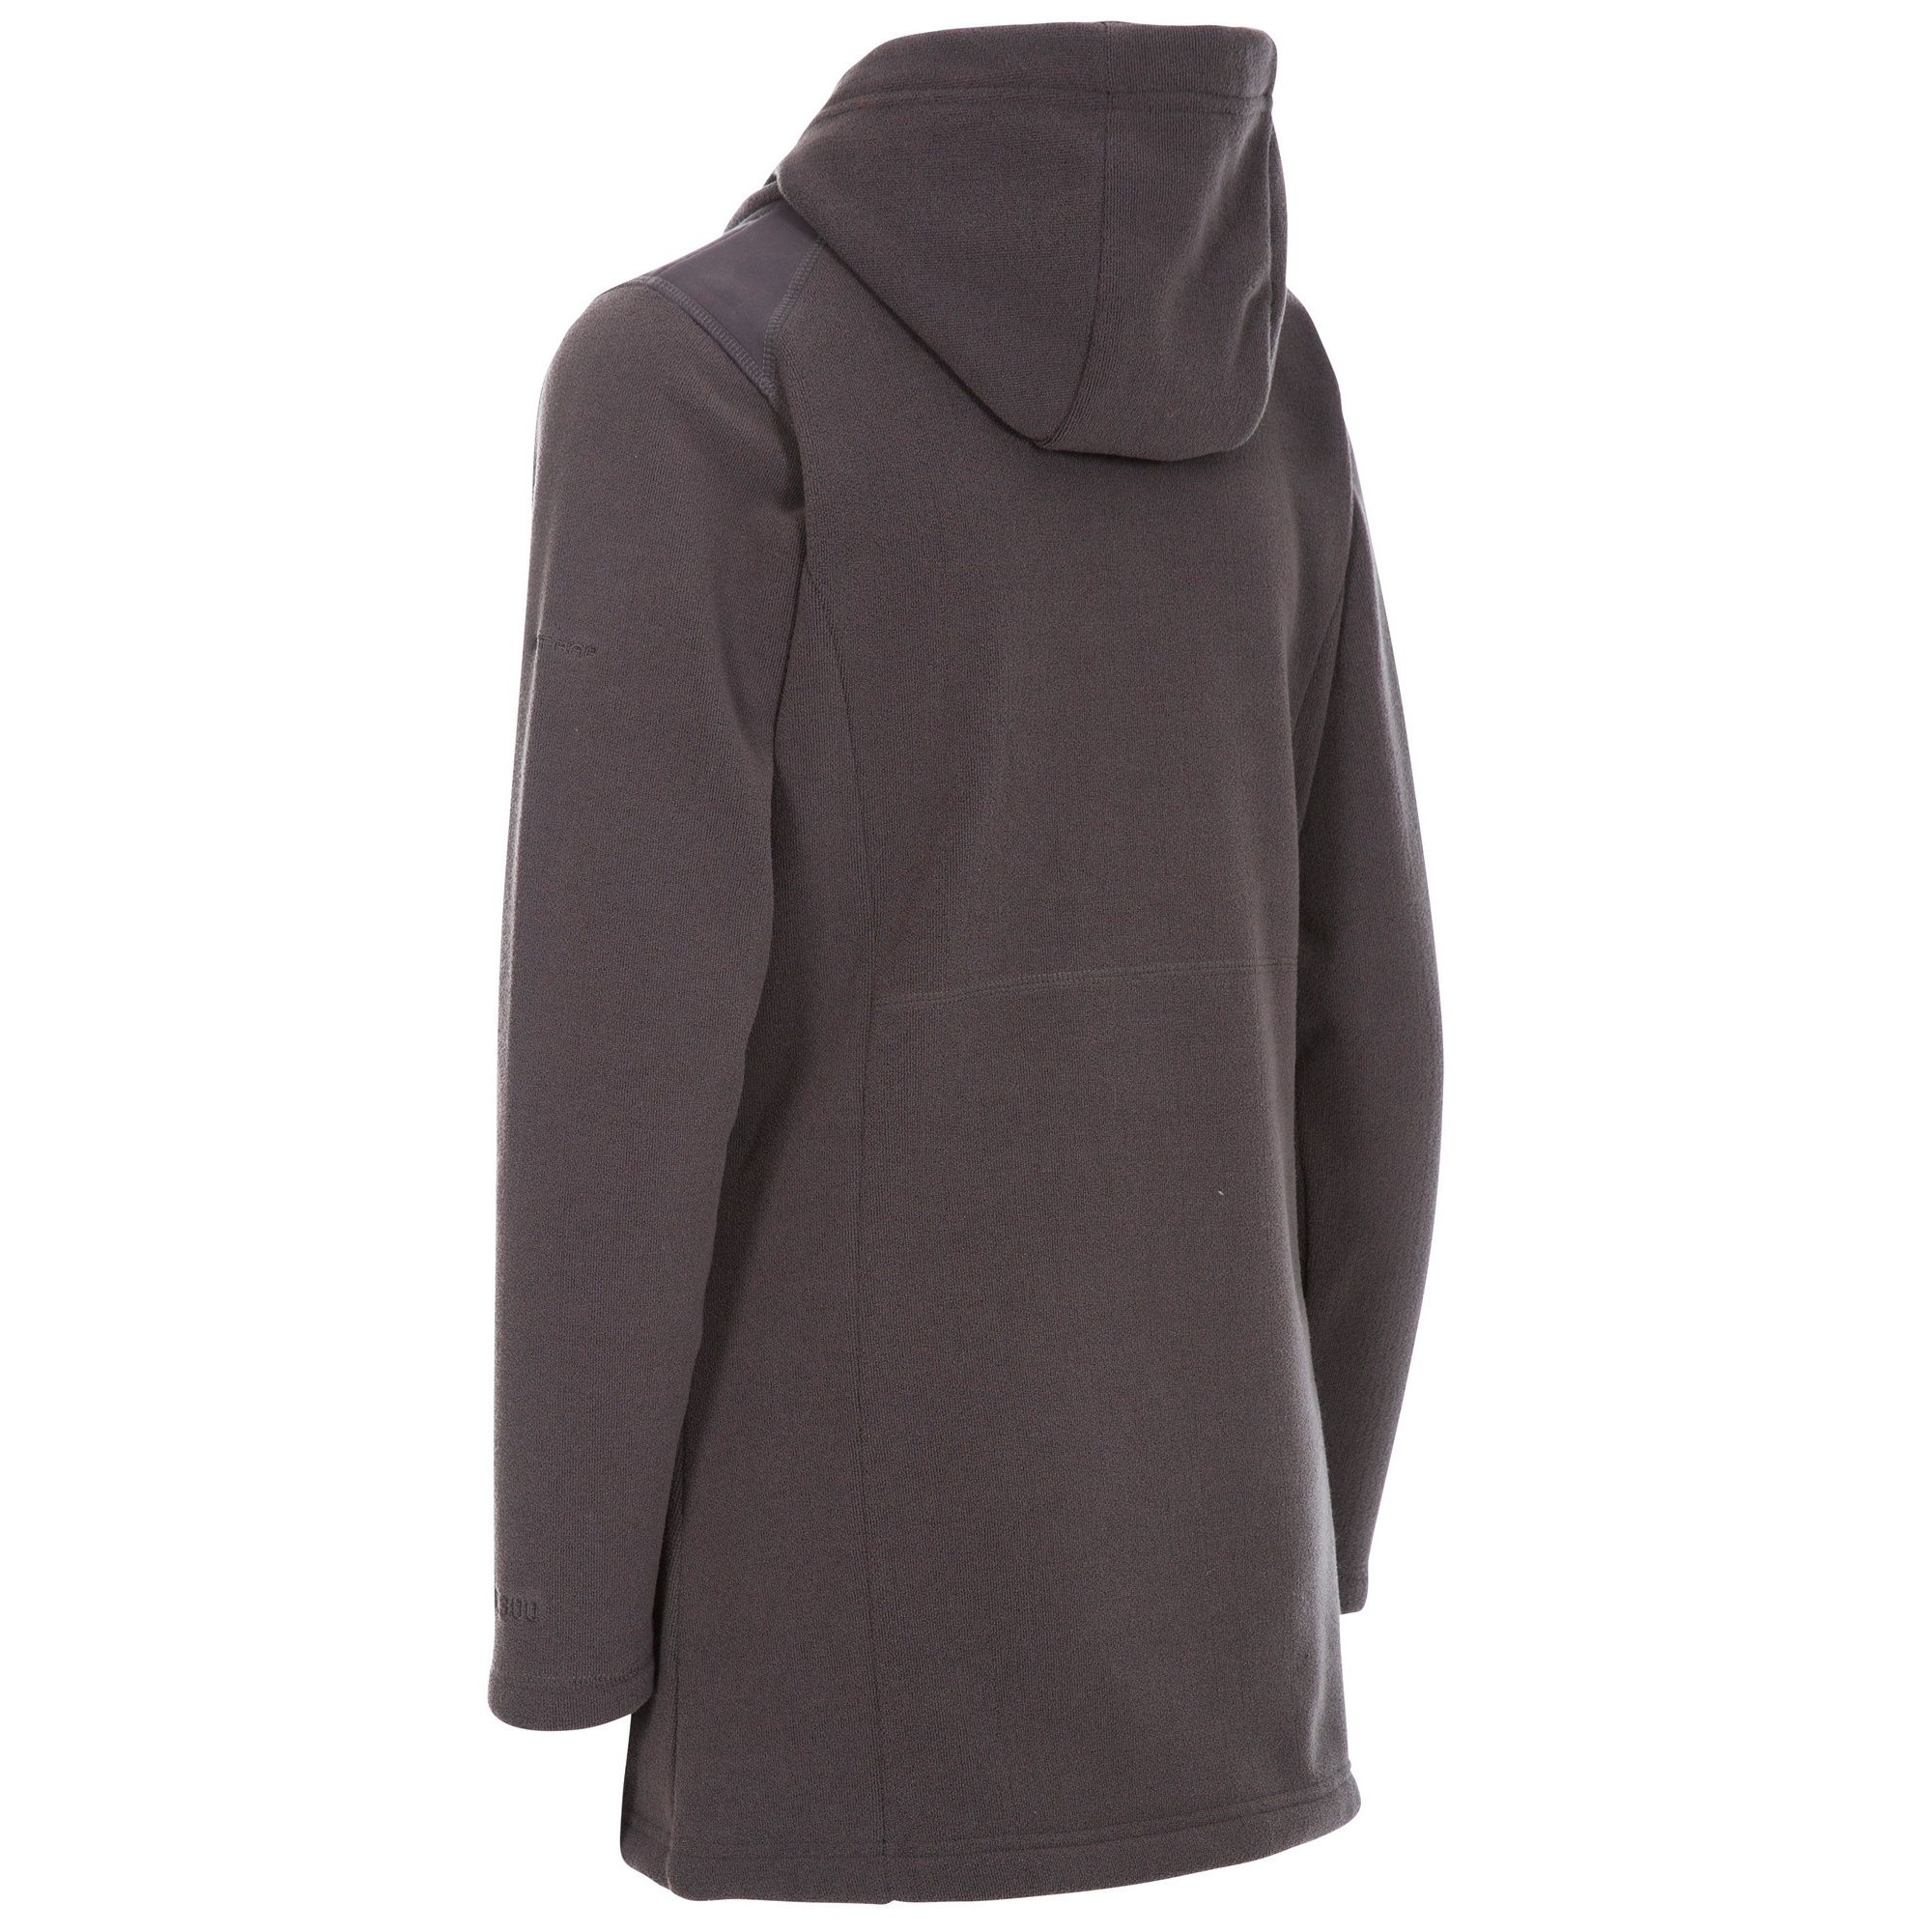 Soft terry fleece with a brushed marl backing. Longer length. Grown on hood style. 2 welted zip pockets. Taslan shoulder panels. Full front zip with inner storm flap. Leather trims. Airtrap. 340gsm. 100% Polyester. Trespass Womens Chest Sizing (approx): XS/8 - 32in/81cm, S/10 - 34in/86cm, M/12 - 36in/91.4cm, L/14 - 38in/96.5cm, XL/16 - 40in/101.5cm, XXL/18 - 42in/106.5cm.